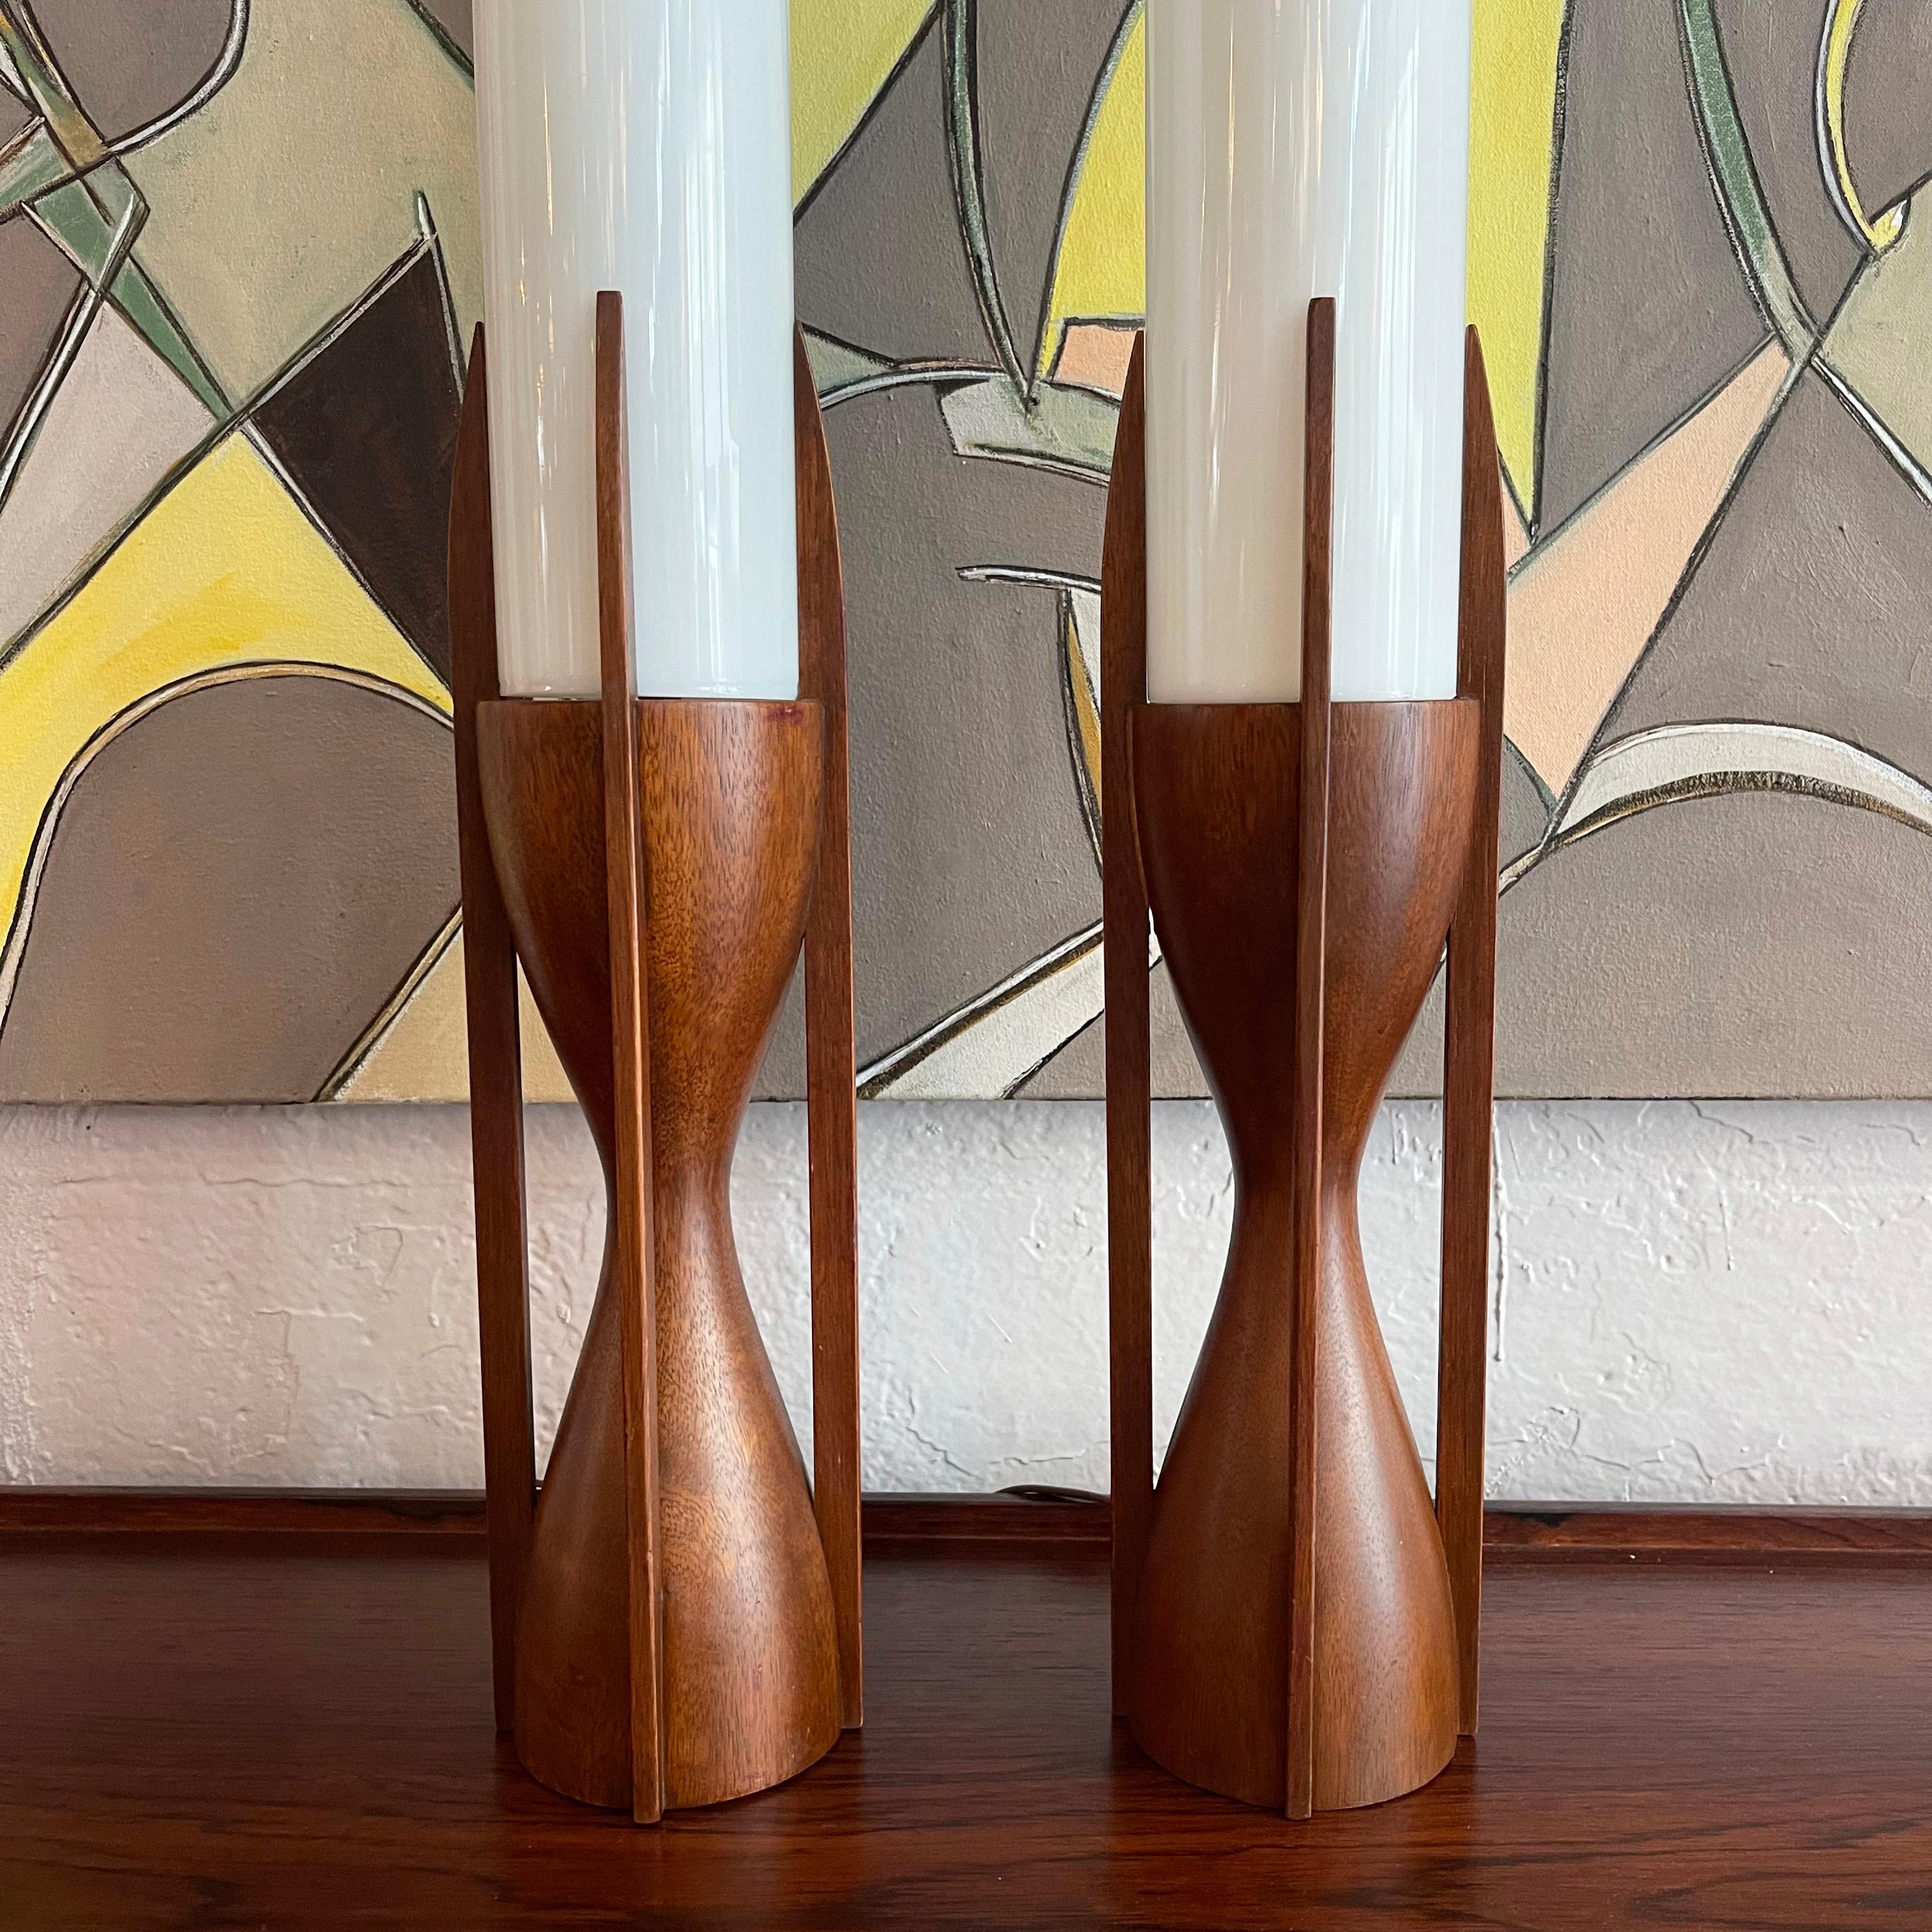 Mid-Century Modern Mid-Century Walnut Milk Glass Cylinder Table Lamps By Byron Botker For Modeline For Sale